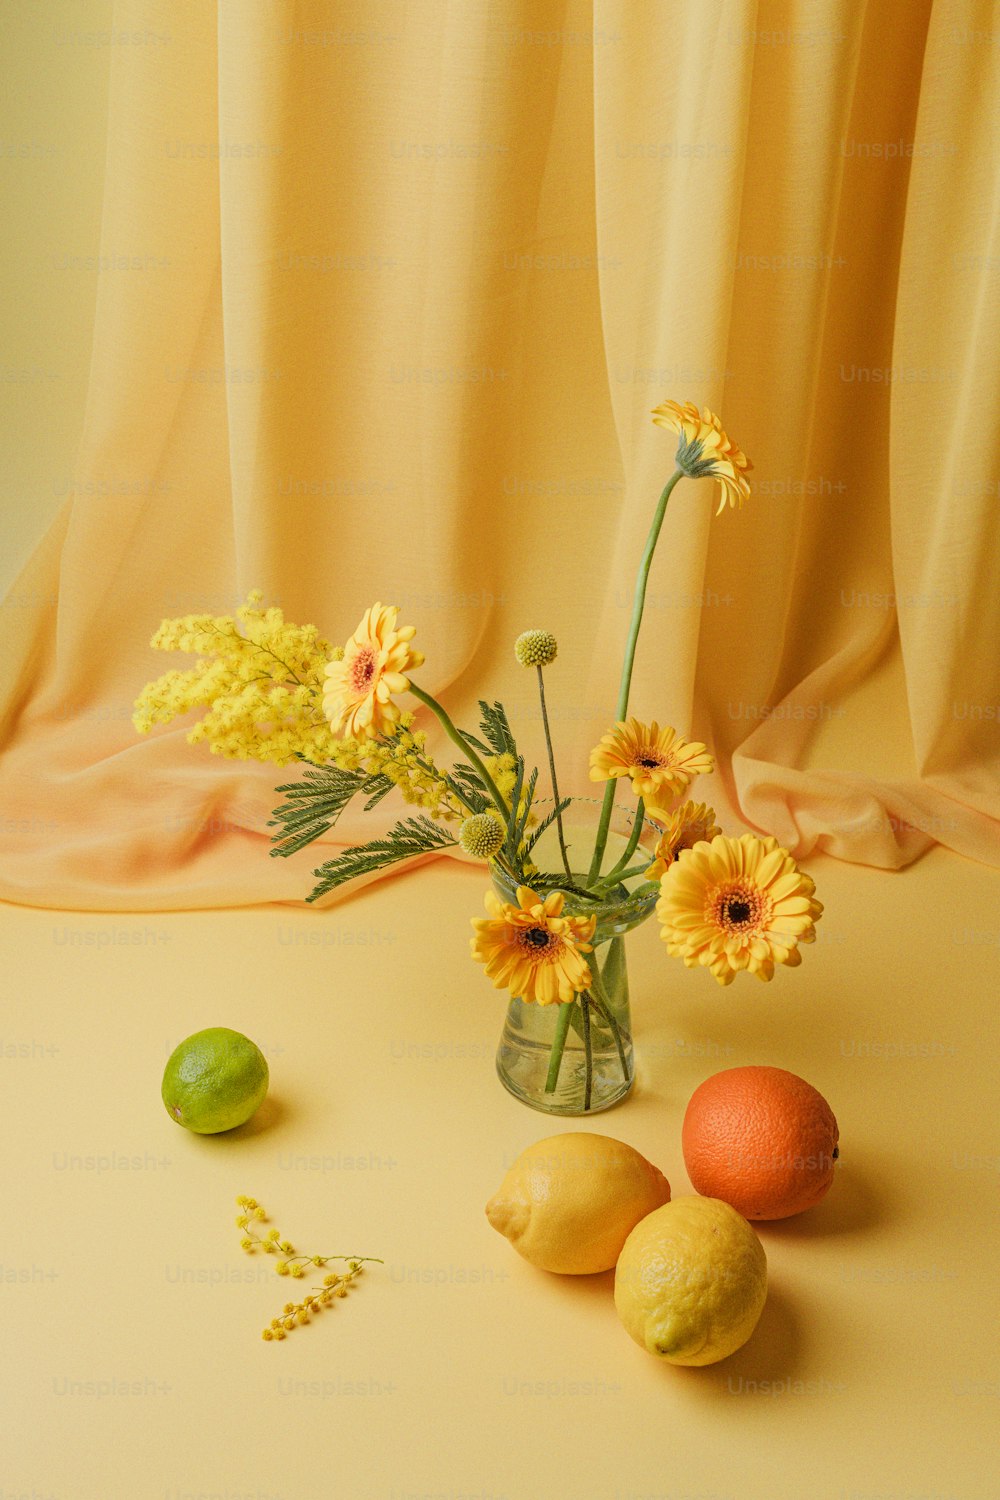 a vase filled with yellow flowers next to lemons